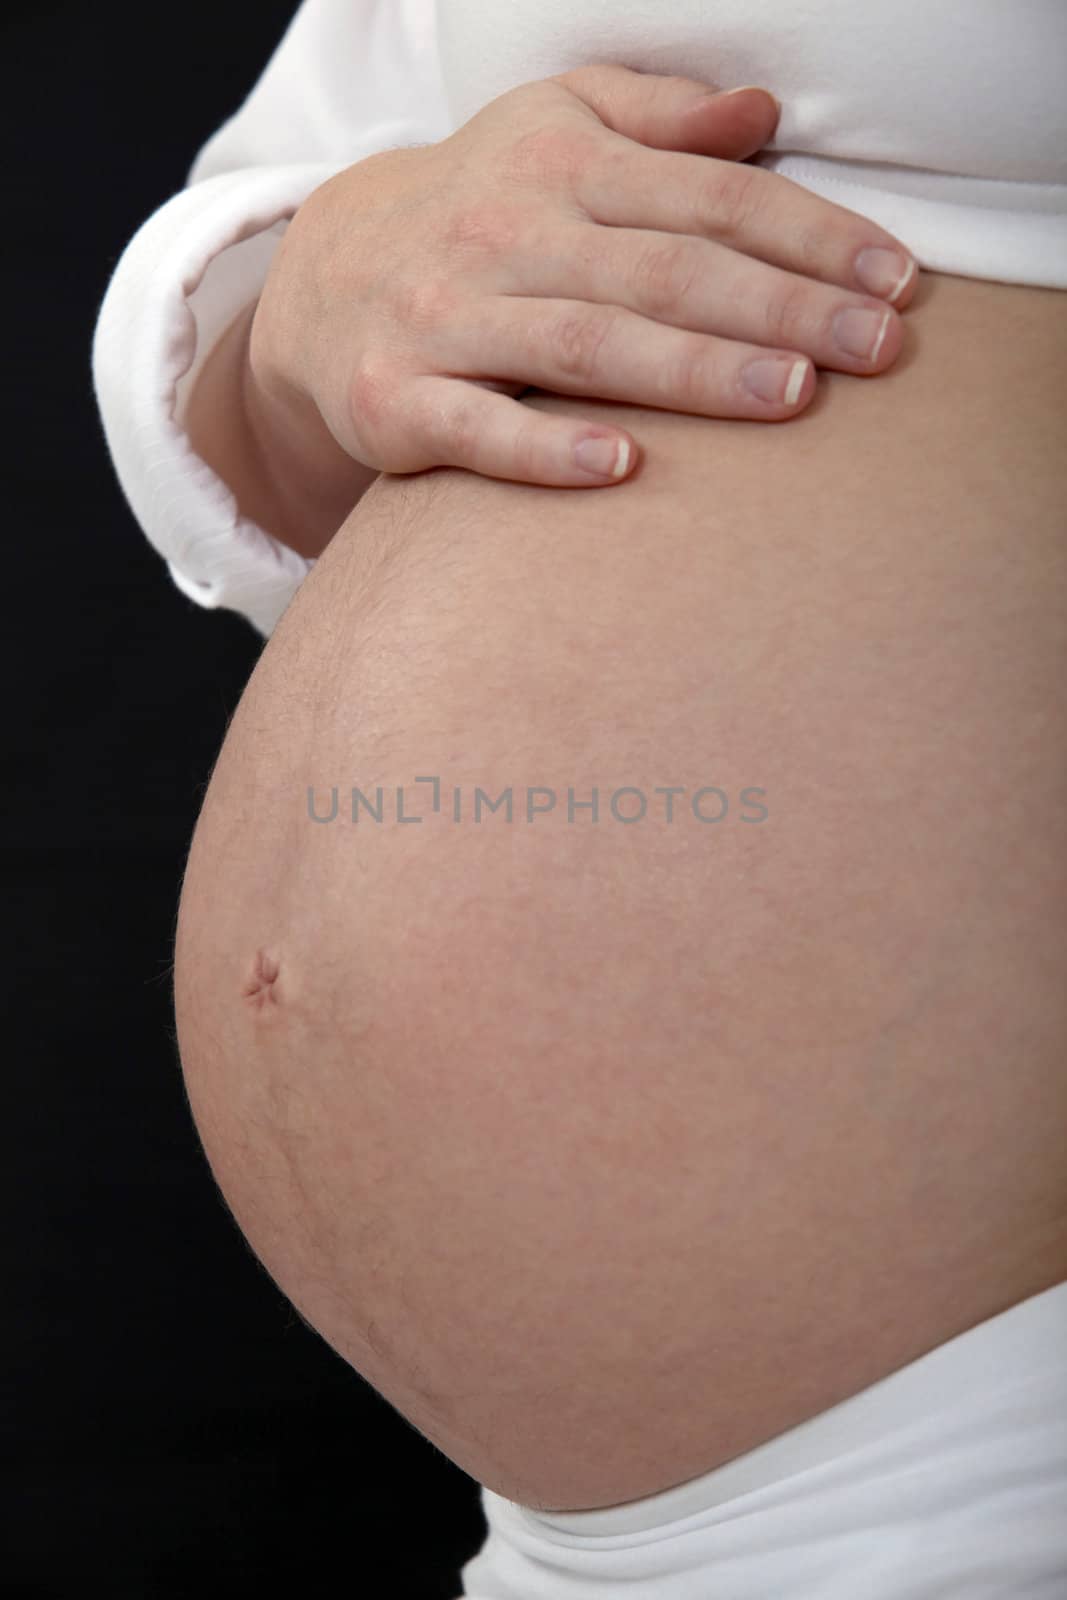 Belly of pregnant woman by phovoir